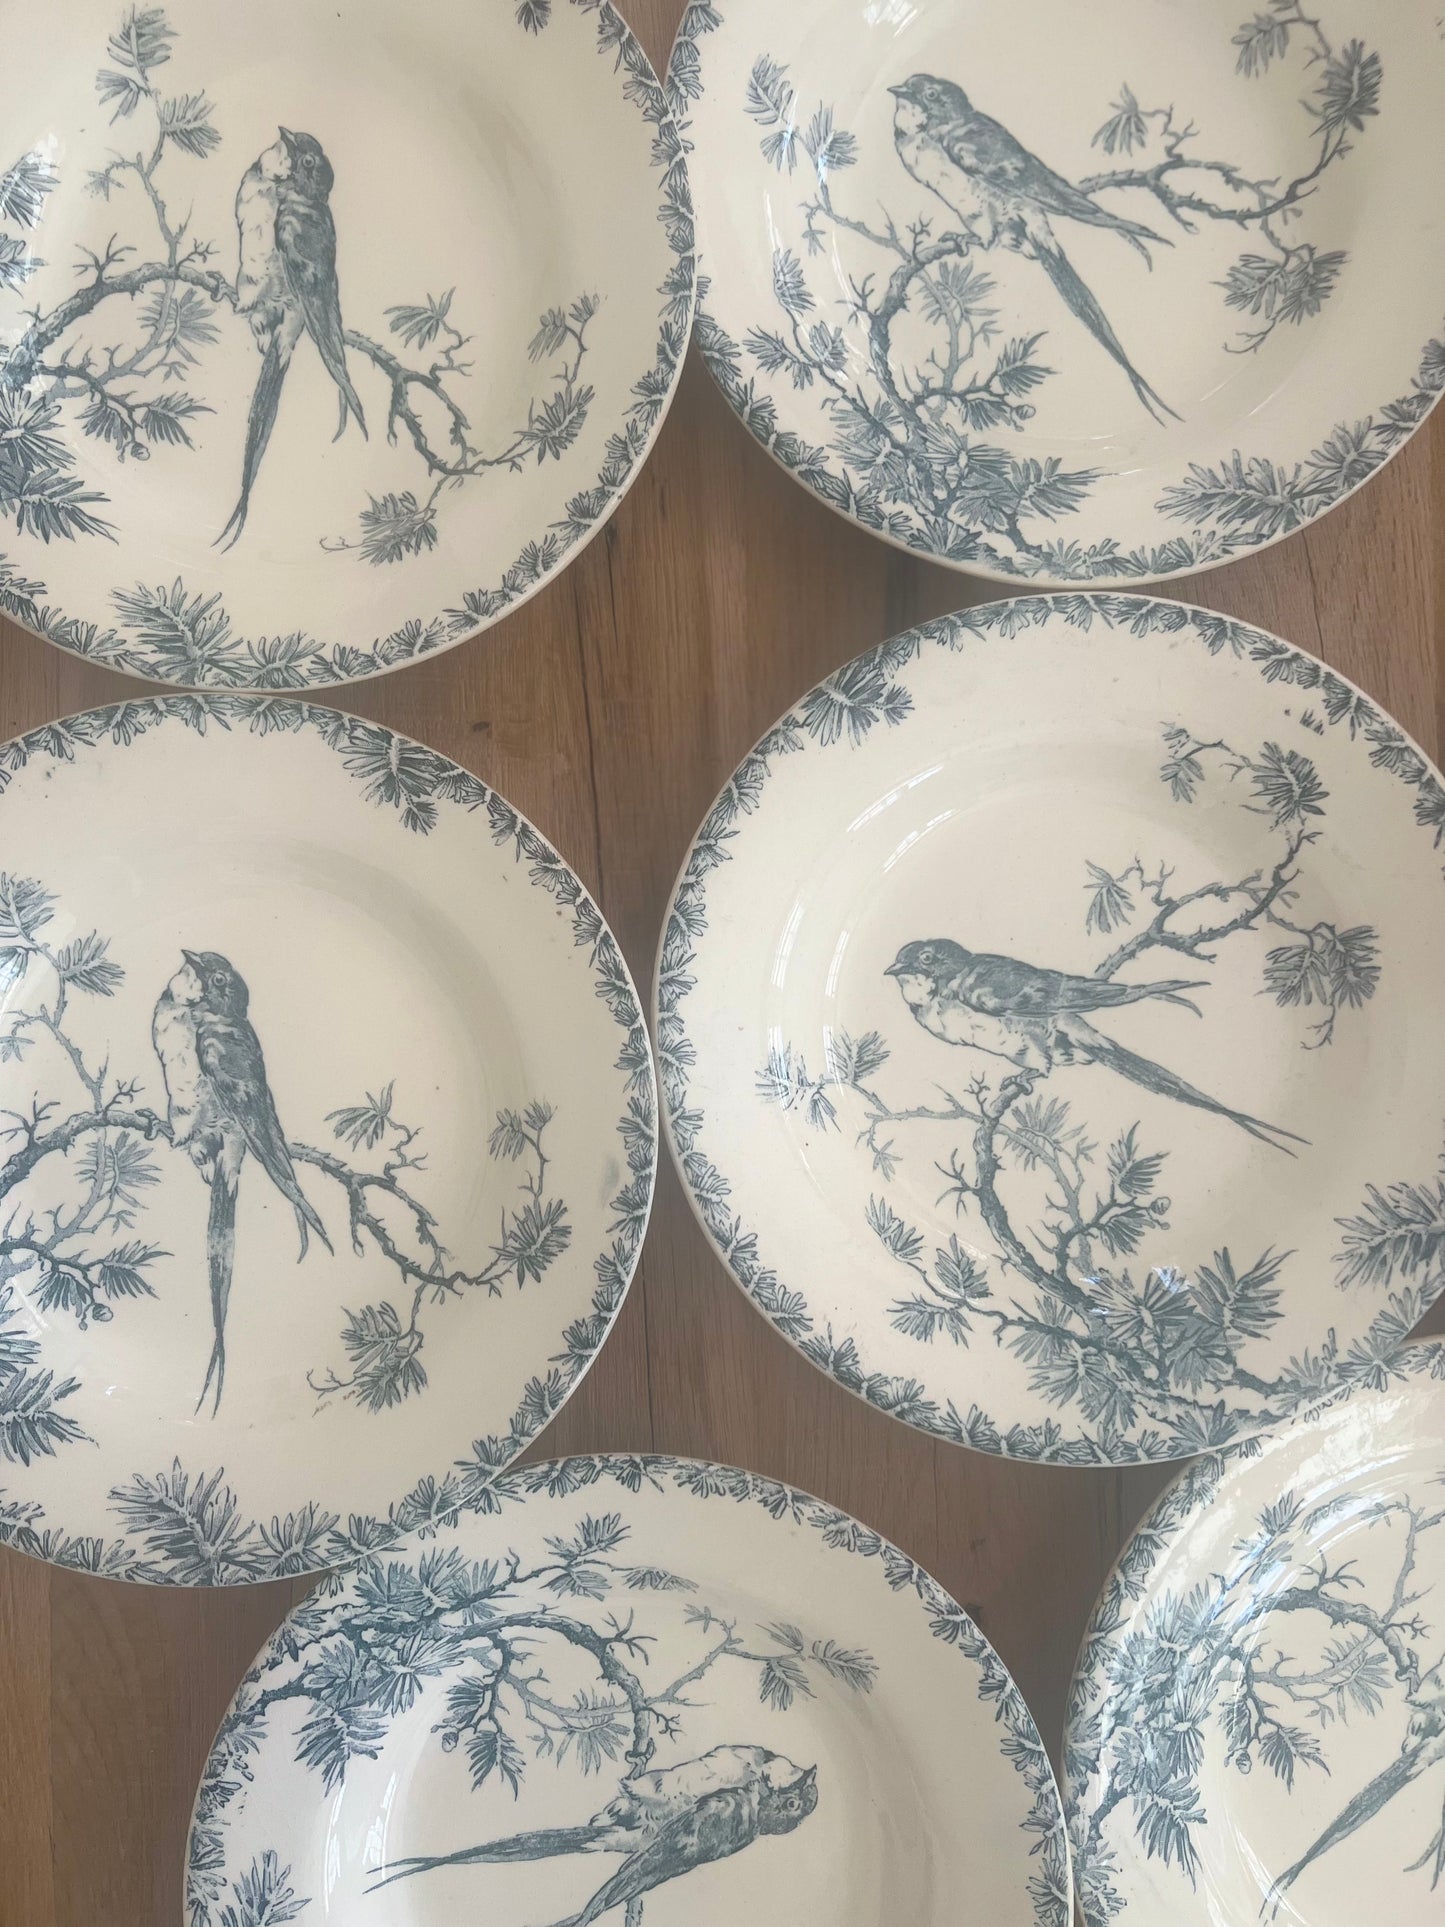 Set of 6 French Ironstone Soup Plates "Provençal" by Gien